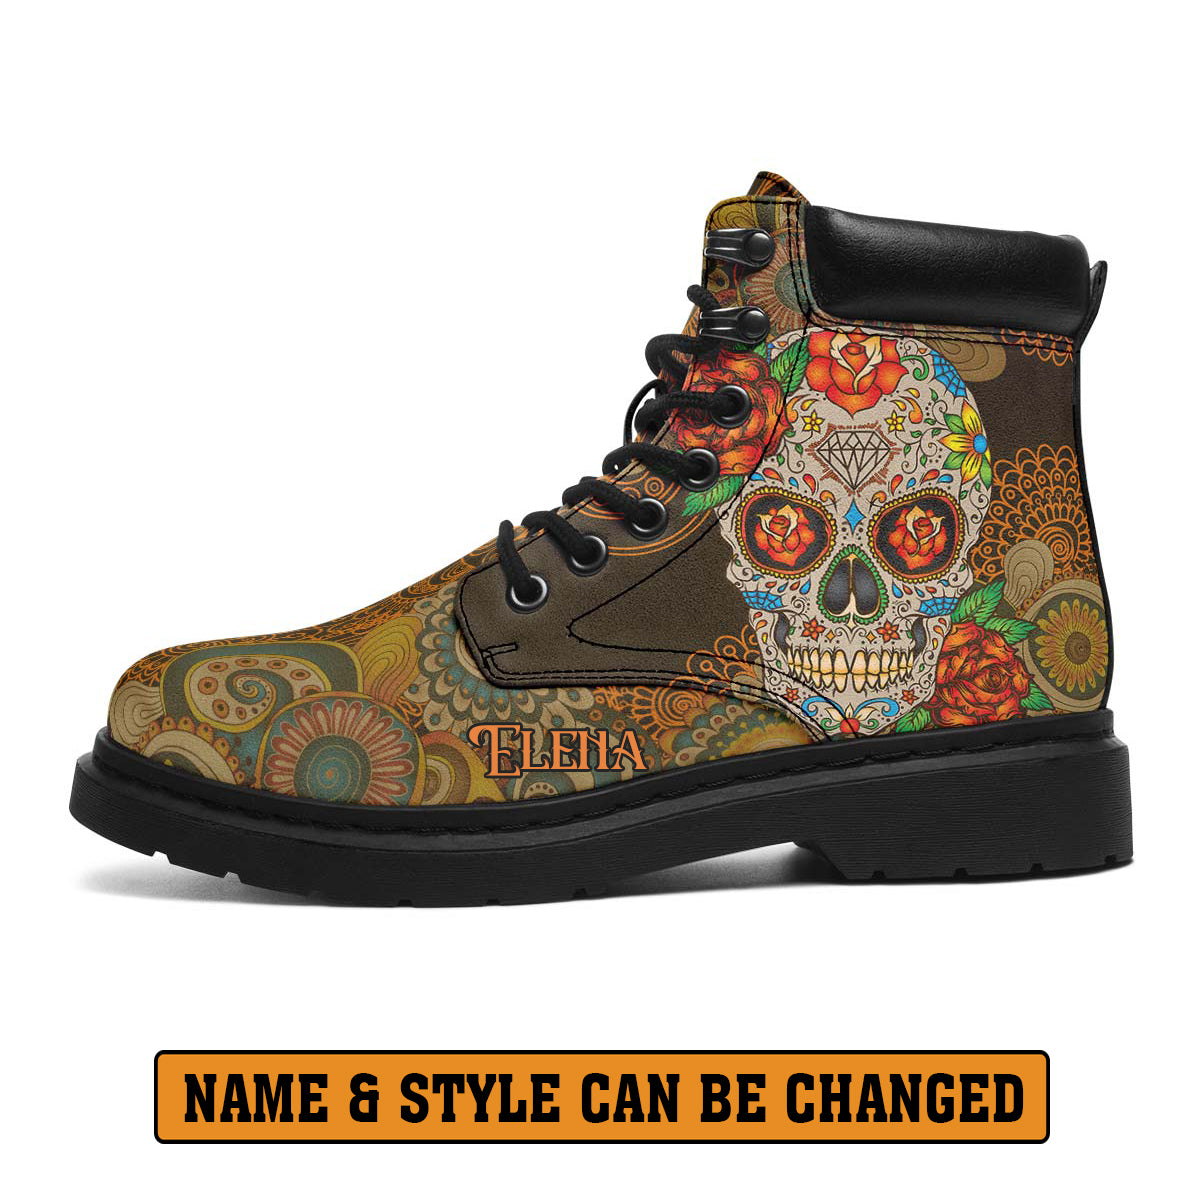 EShoes Personalized Boots, Sugar Skull Mexican Boots, Custom Name Boots.